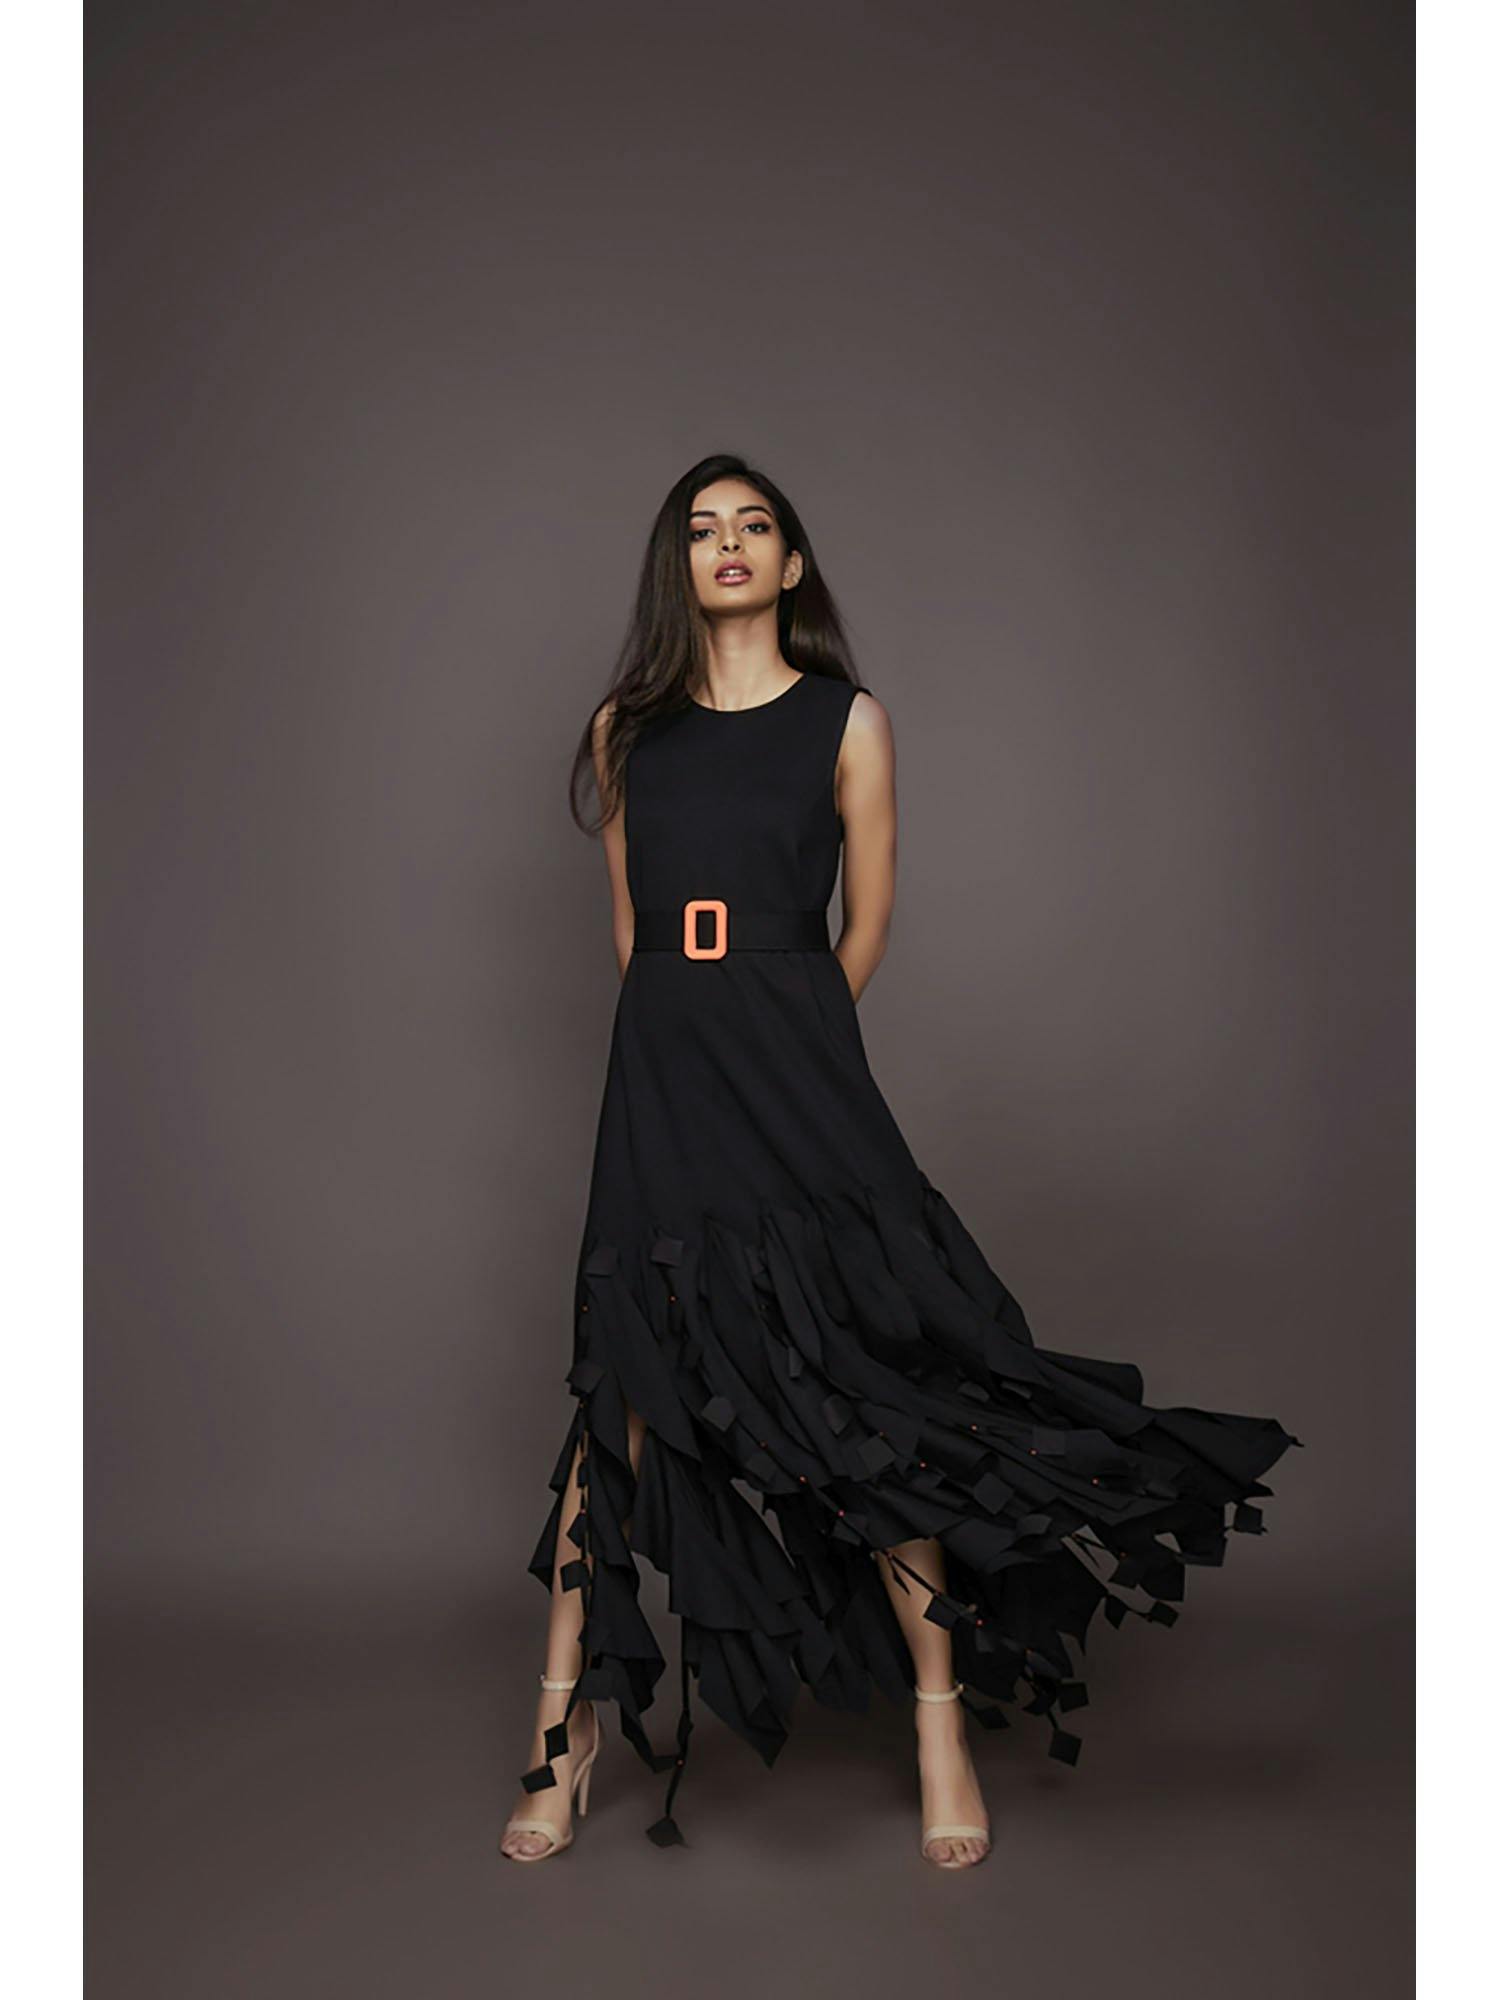 Black ruffled dress with neon detailing NN-1117, a product by Deepika Arora